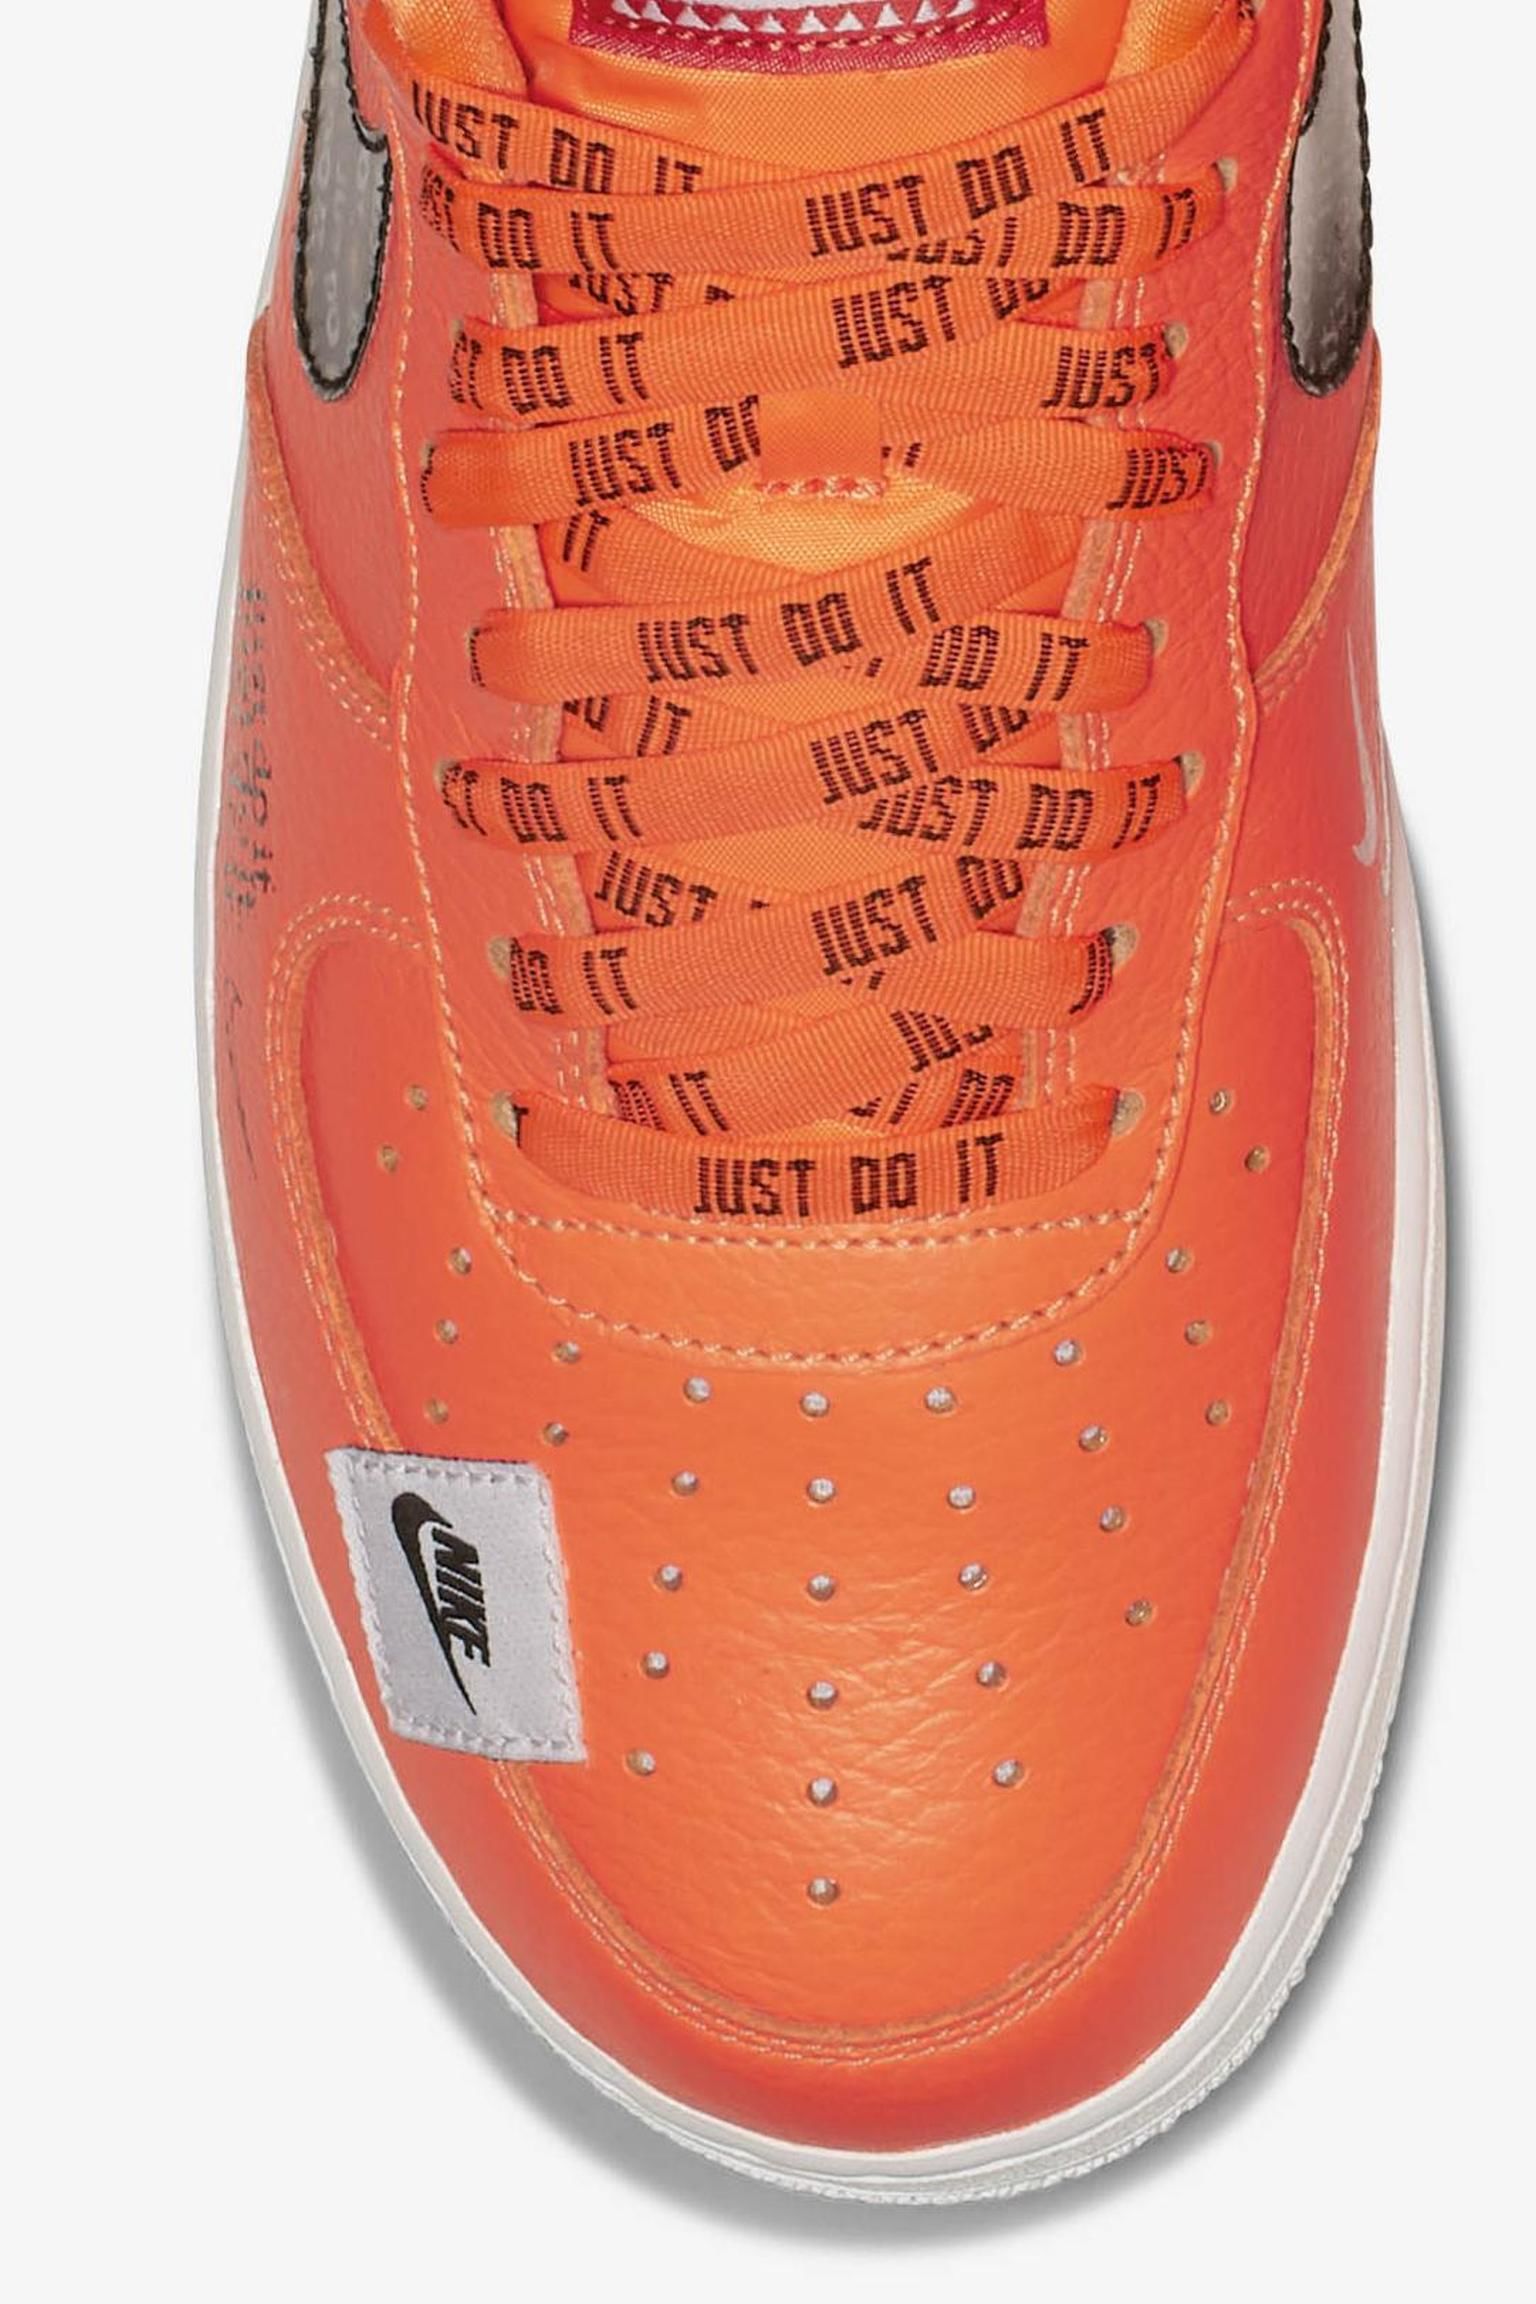 nike air force 1 high just do it total orange